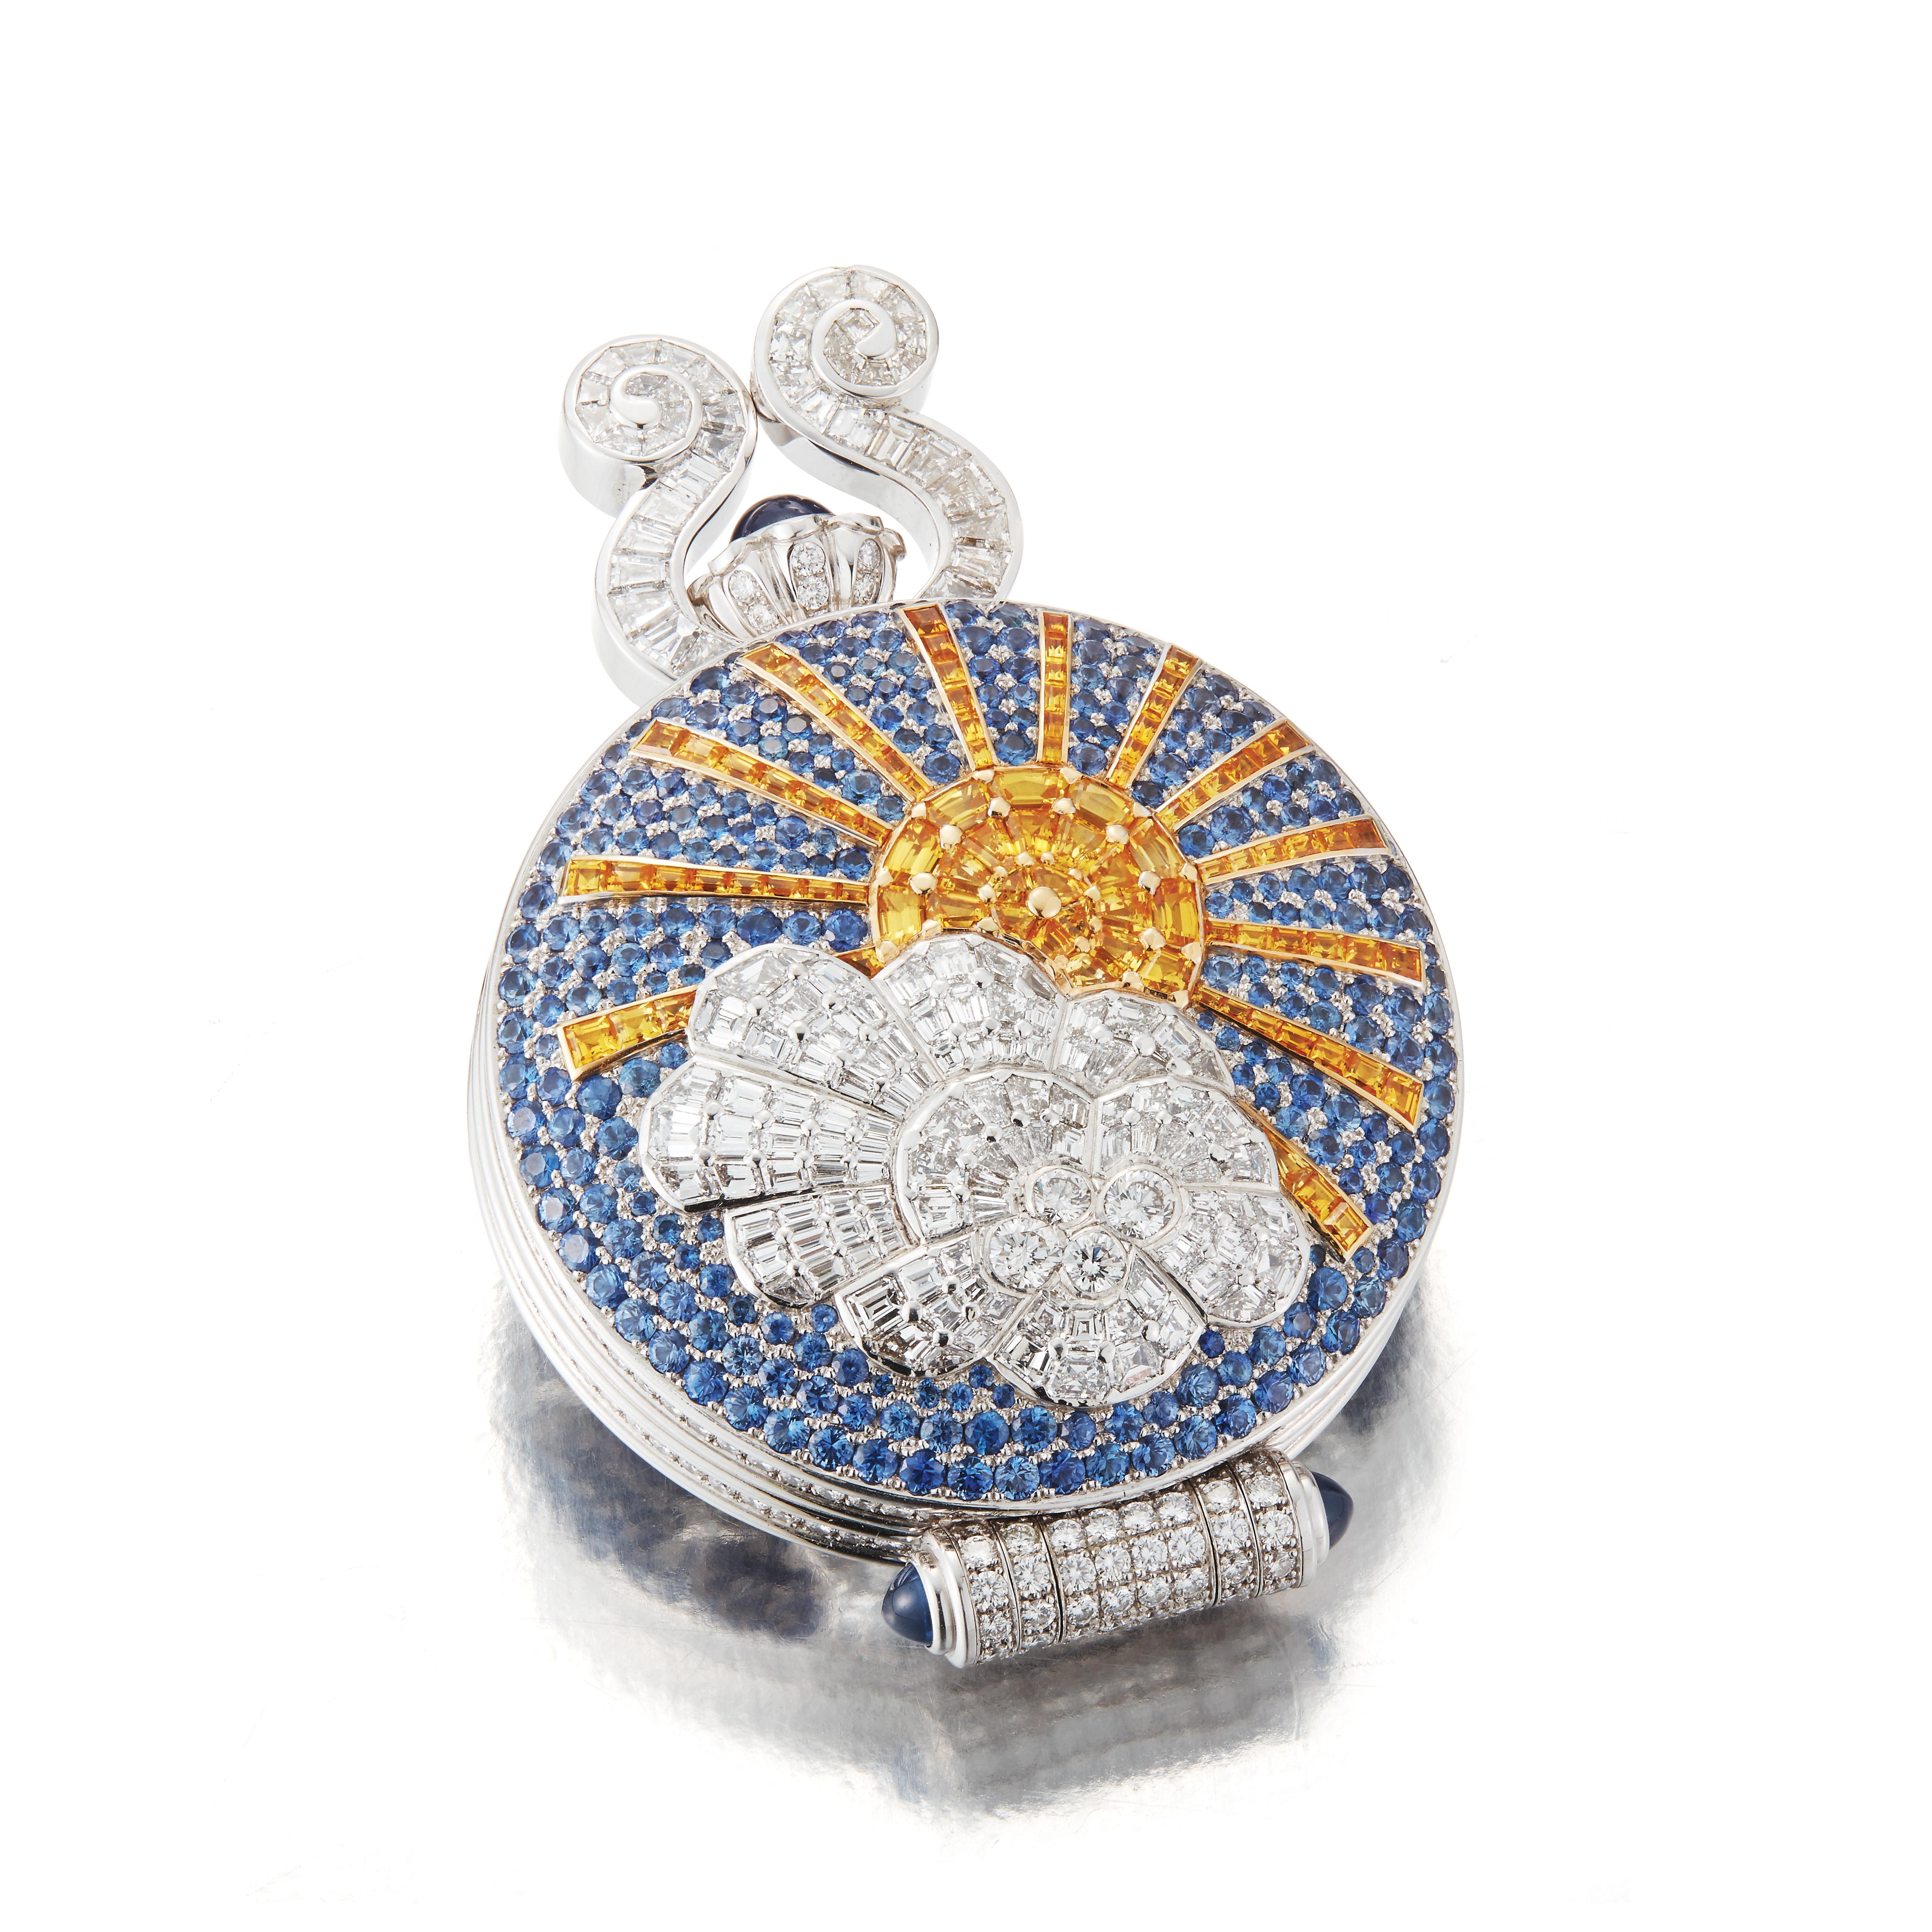 This one of a kind pocket watch was made with 18k white gold, with a yellow sapphire sun partially covered by a diamond-set cloud set across a blue sapphire sky. The backside of the watch depicts a night sky made of dark blue sapphires with a yellow